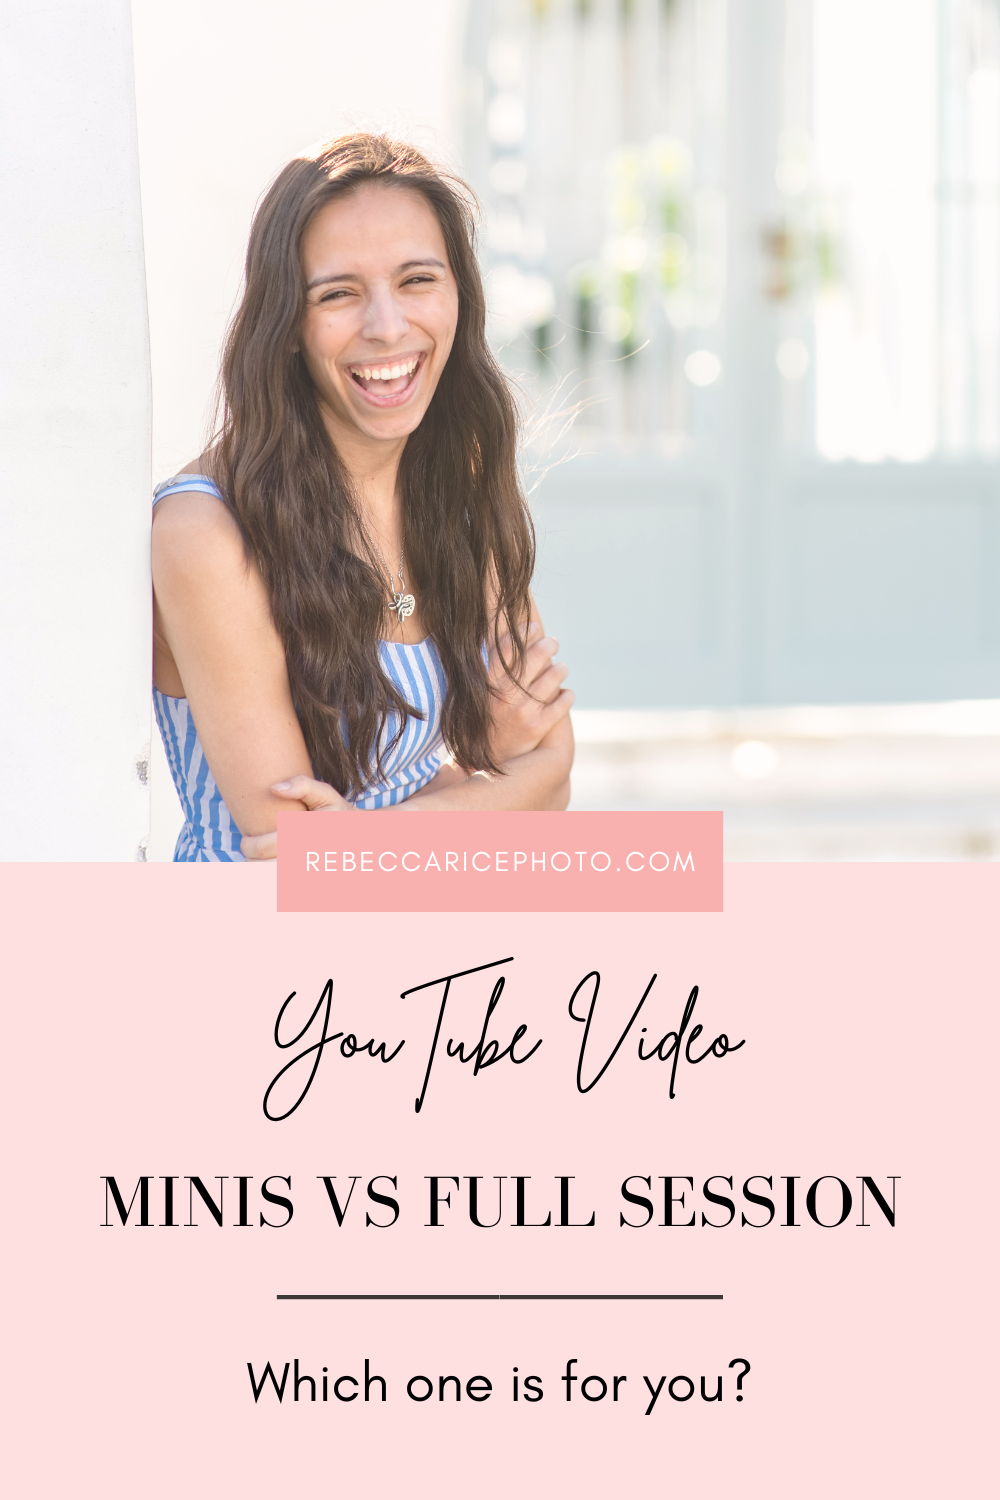 Minis vs Full Sessions - which one is for you?